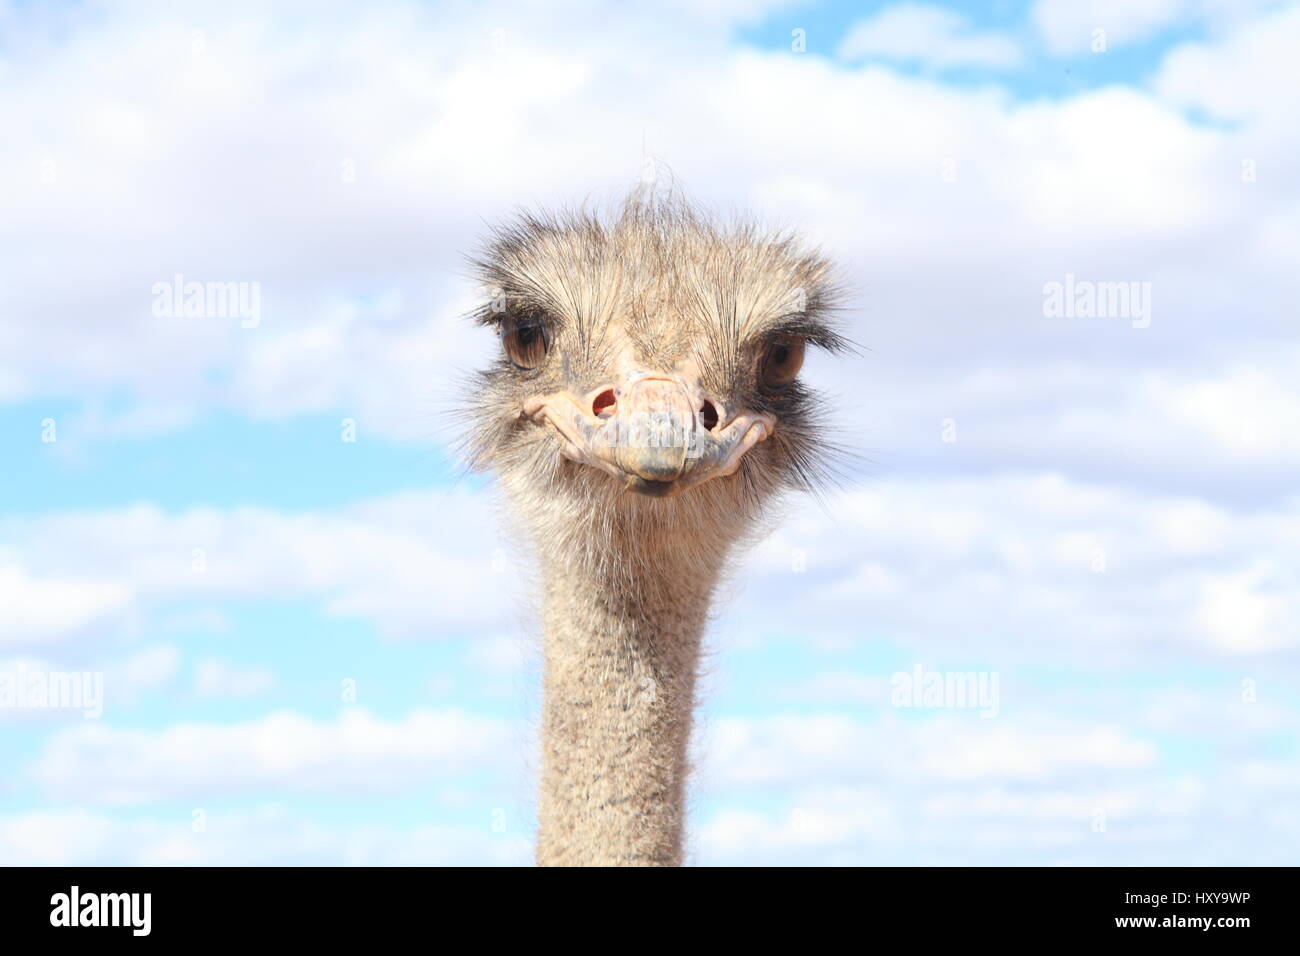 Ostriches faces Stock Photo